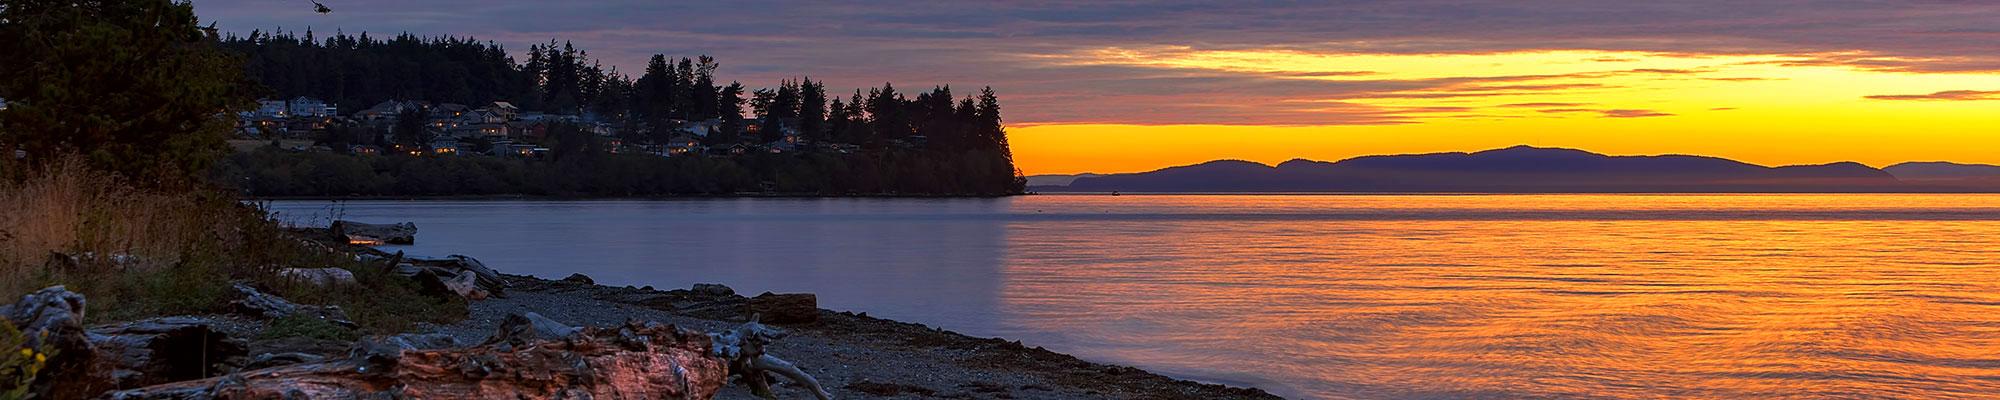 Birch Bay State Park at sunset